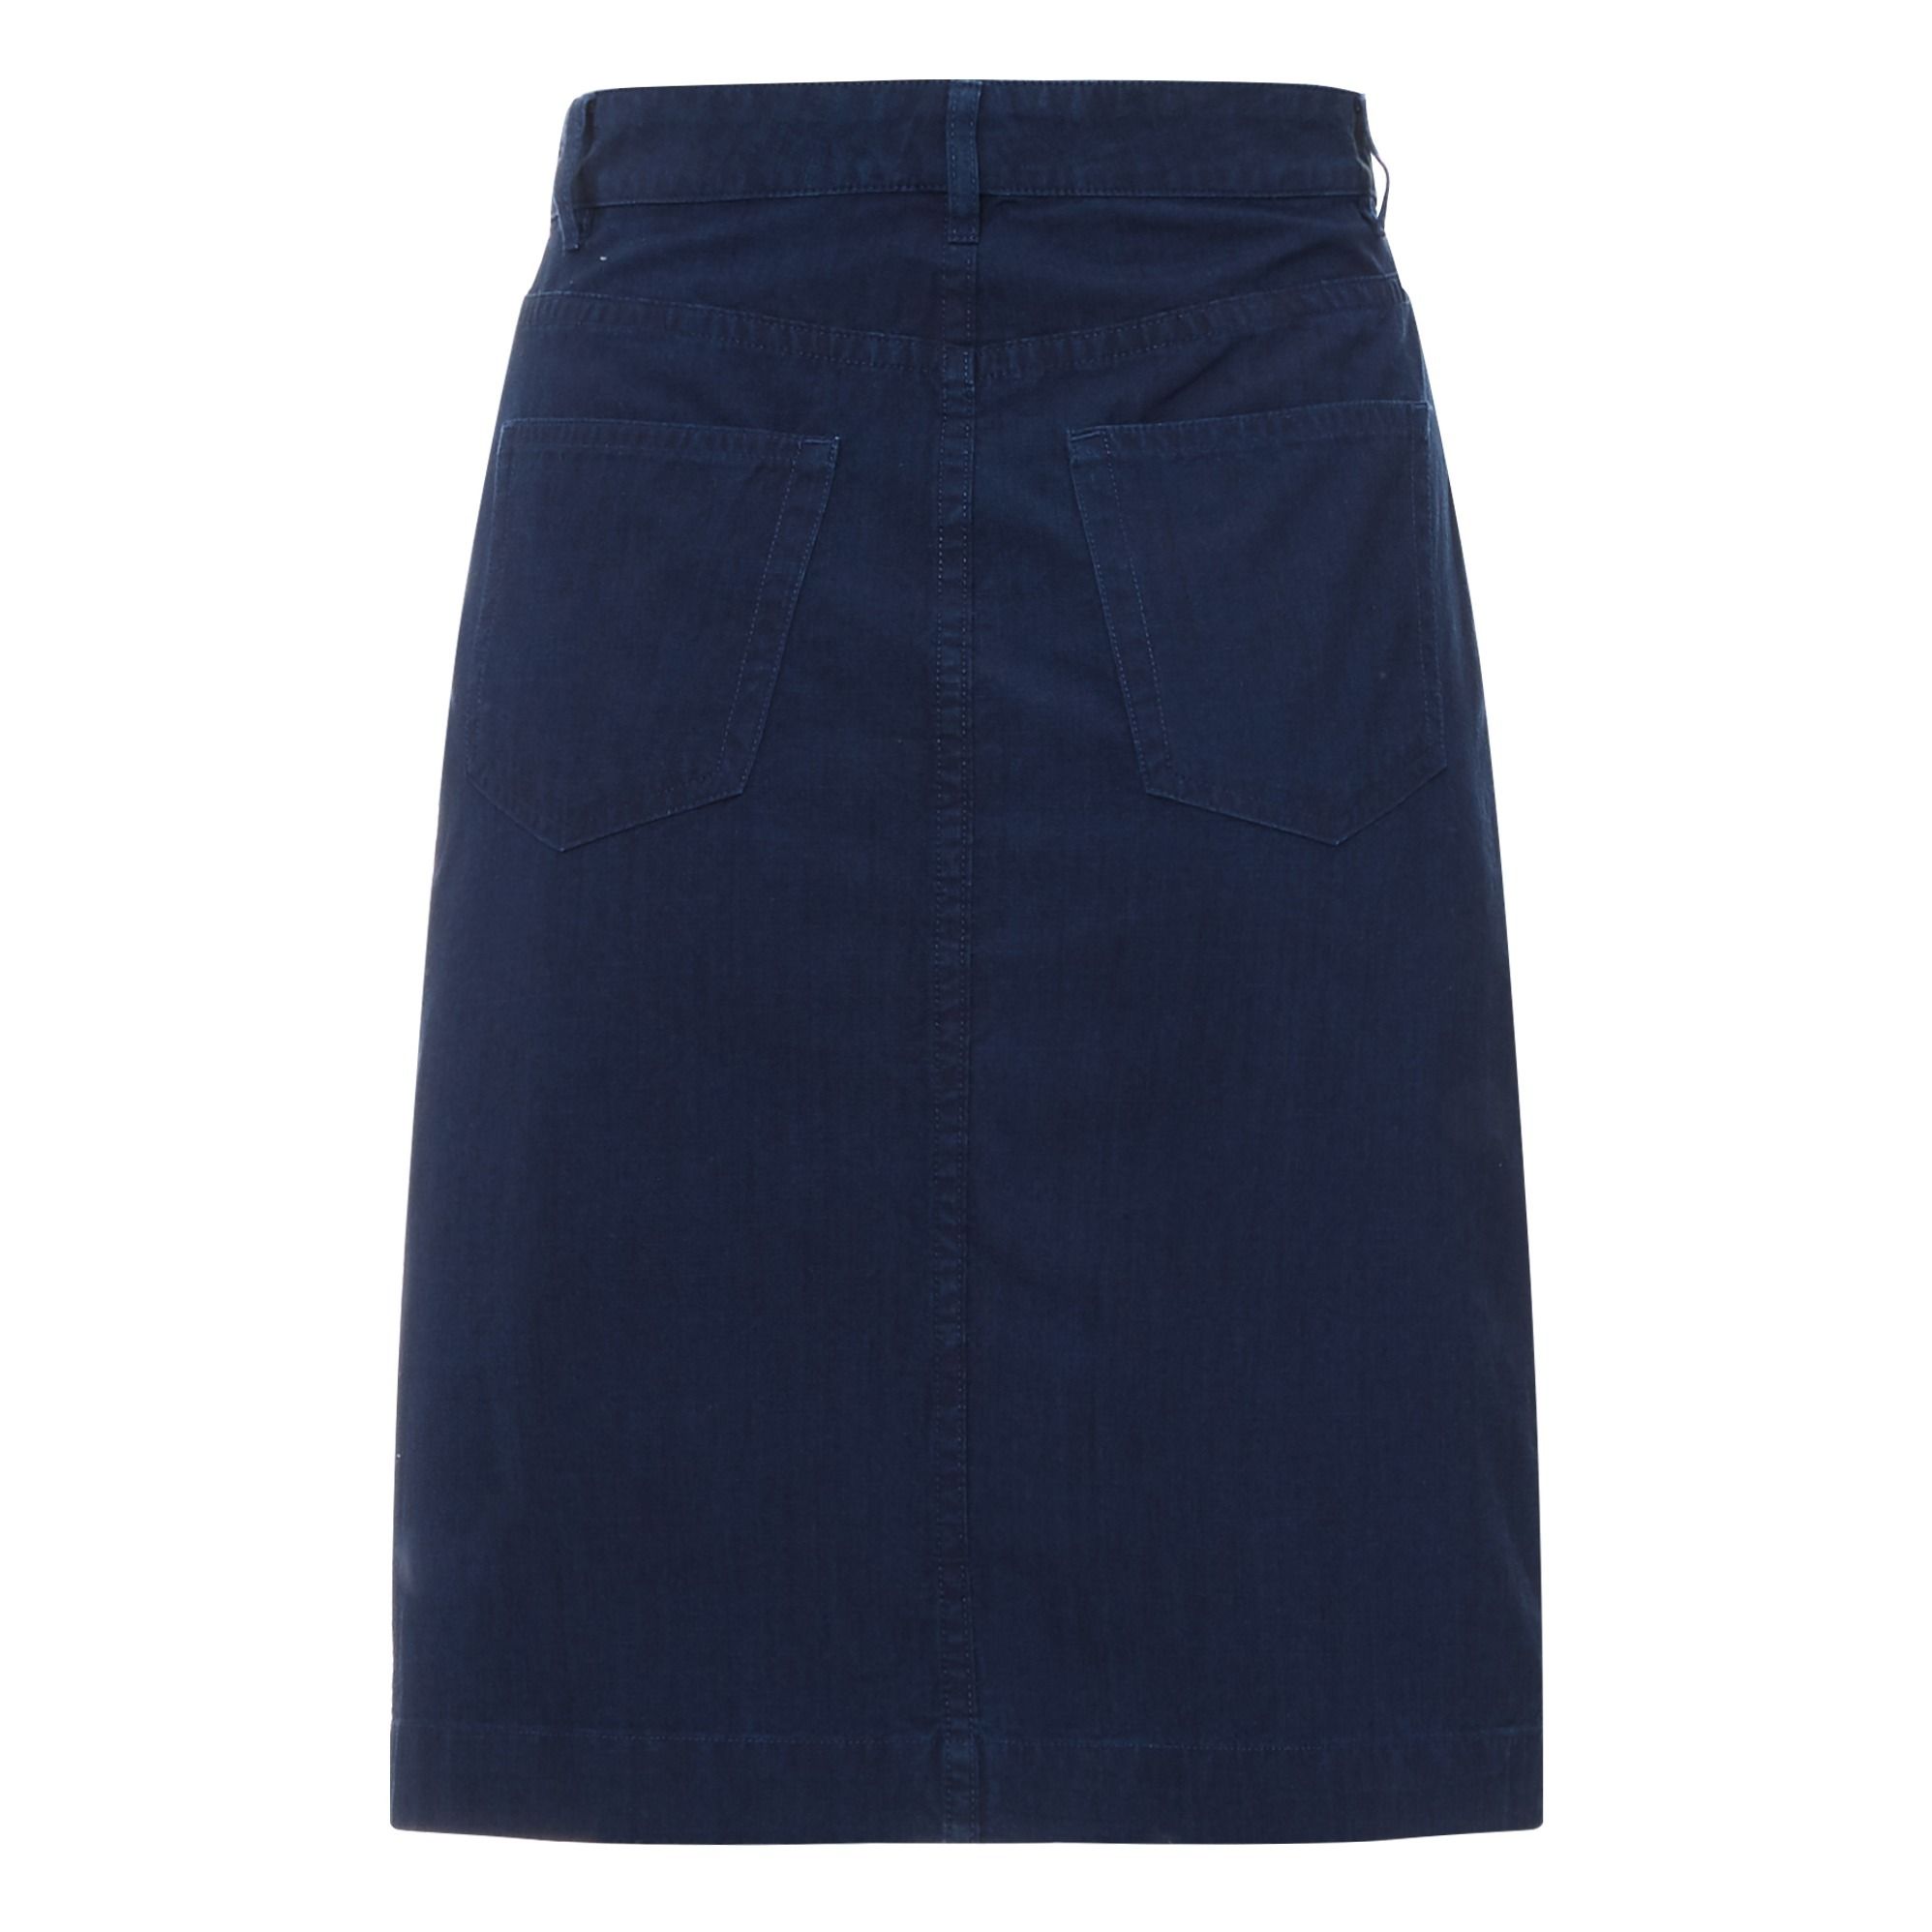 Therese Skirt Navy blue APC Fashion Adult